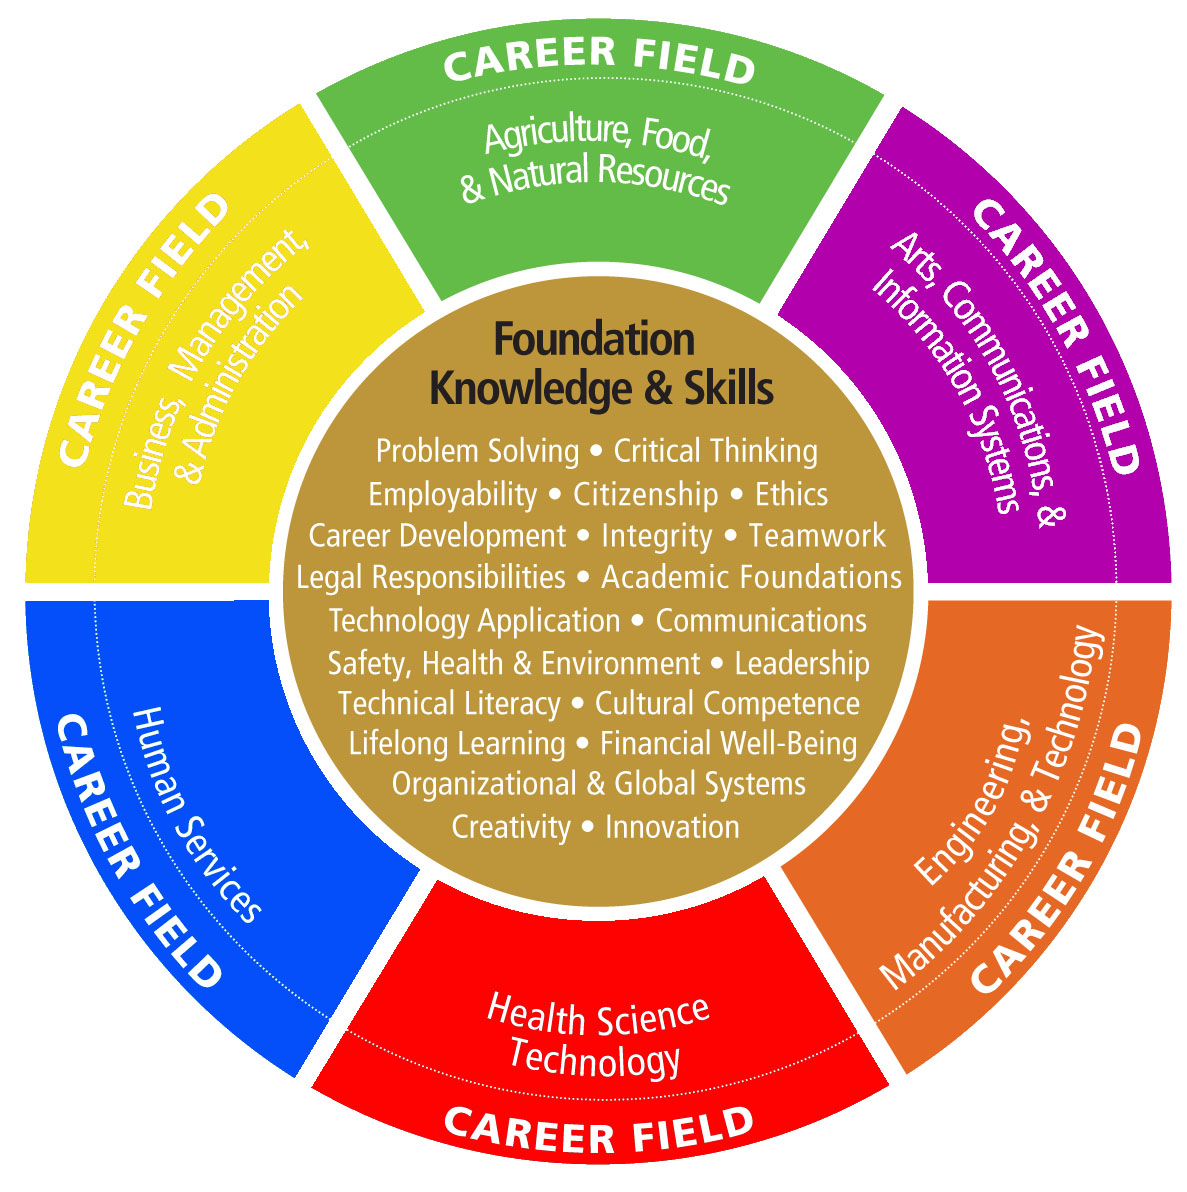 research career fields